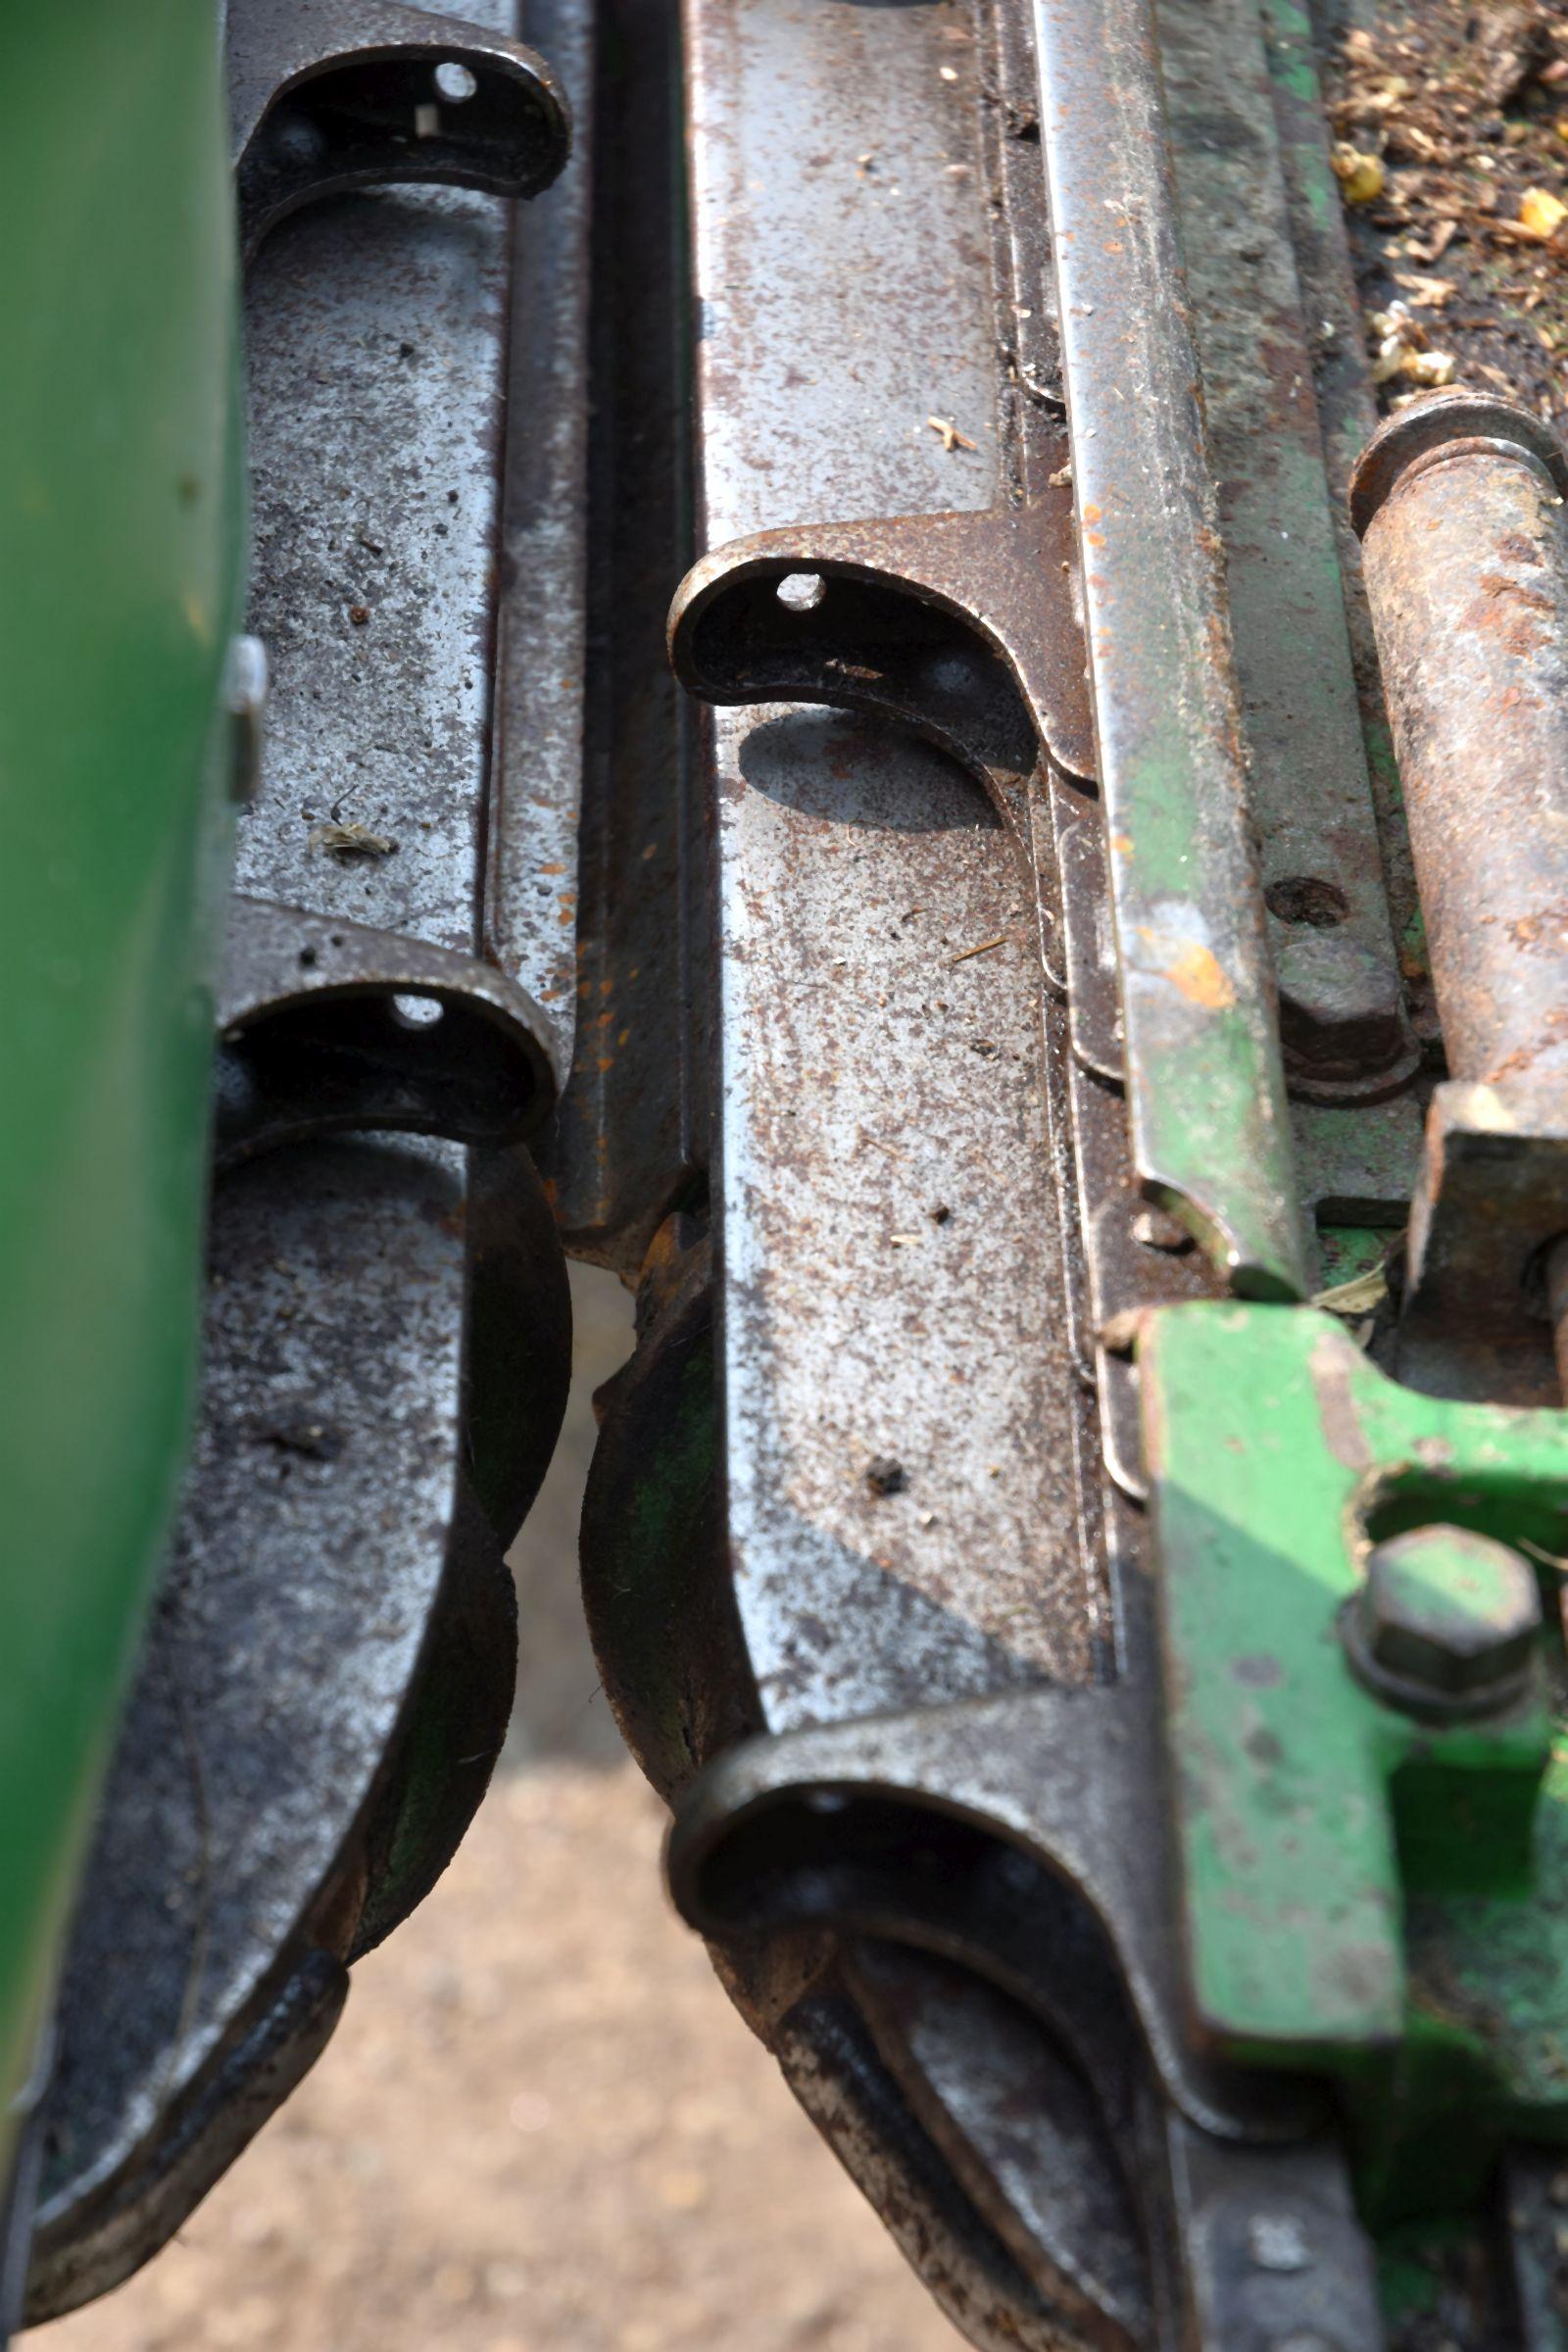 John Deere 843 Corn Head Converted To 6 Row 30”, GUL Poly Snouts, Good Rolls, New Gathering Chains,